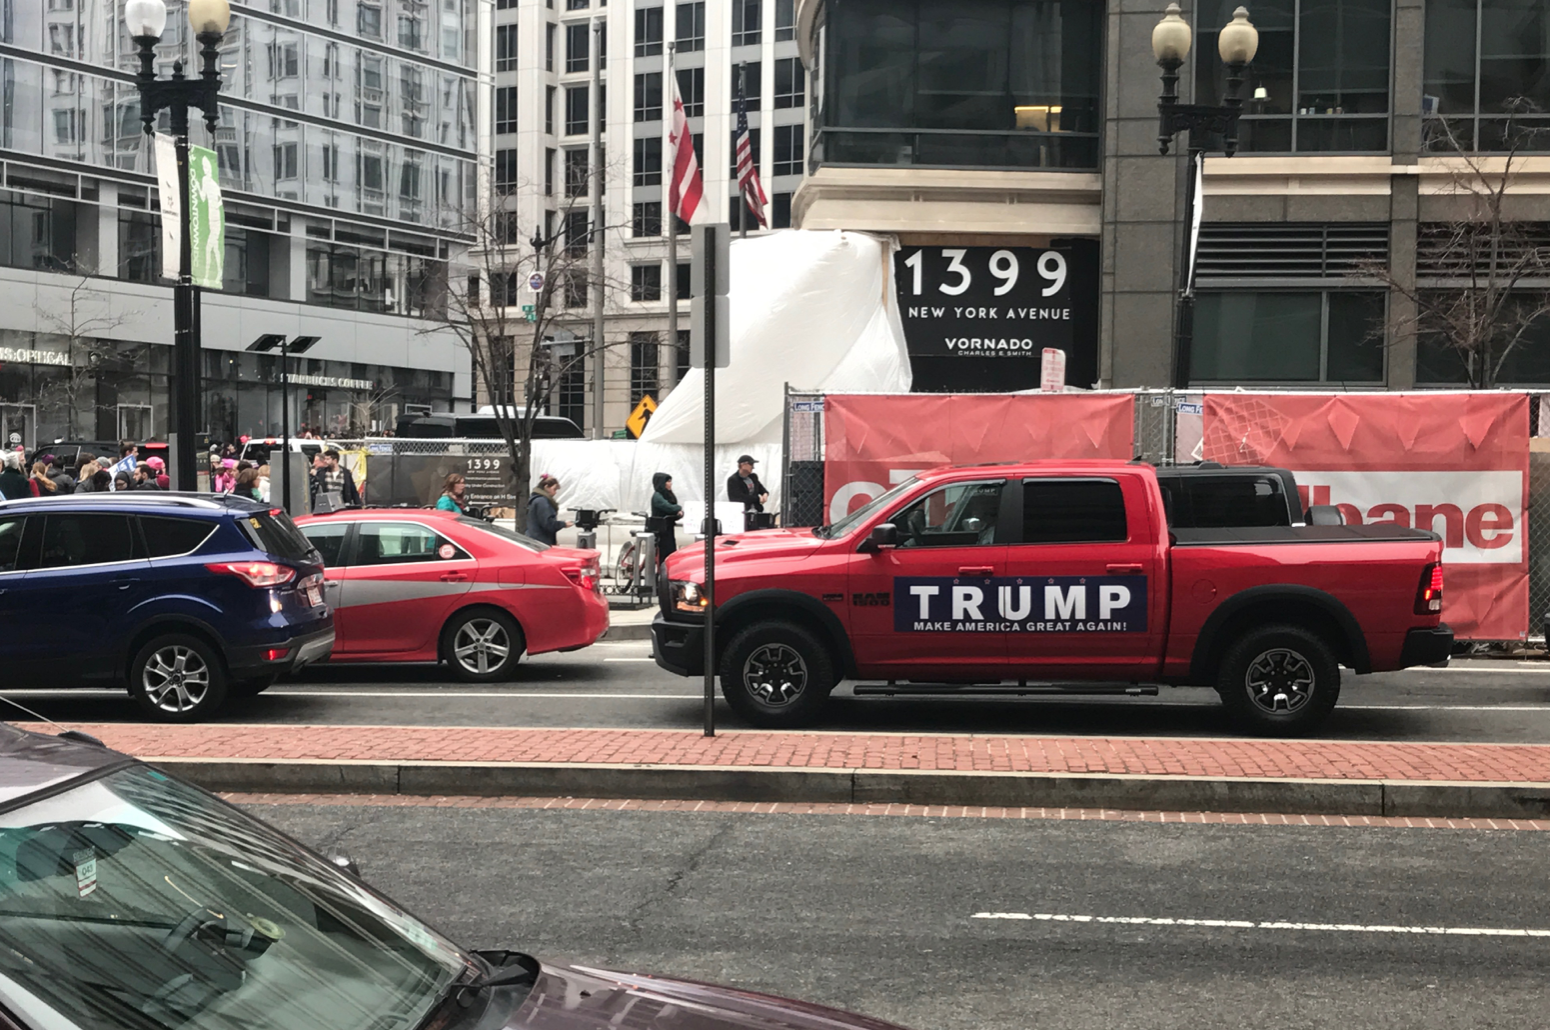 A middle-aged couple drives around in a ‘TRUMP truck.’ We witness them turn around to avoid getting stuck in the crowd. The woman in the passenger seat recorded a video of the marchers on her phone.